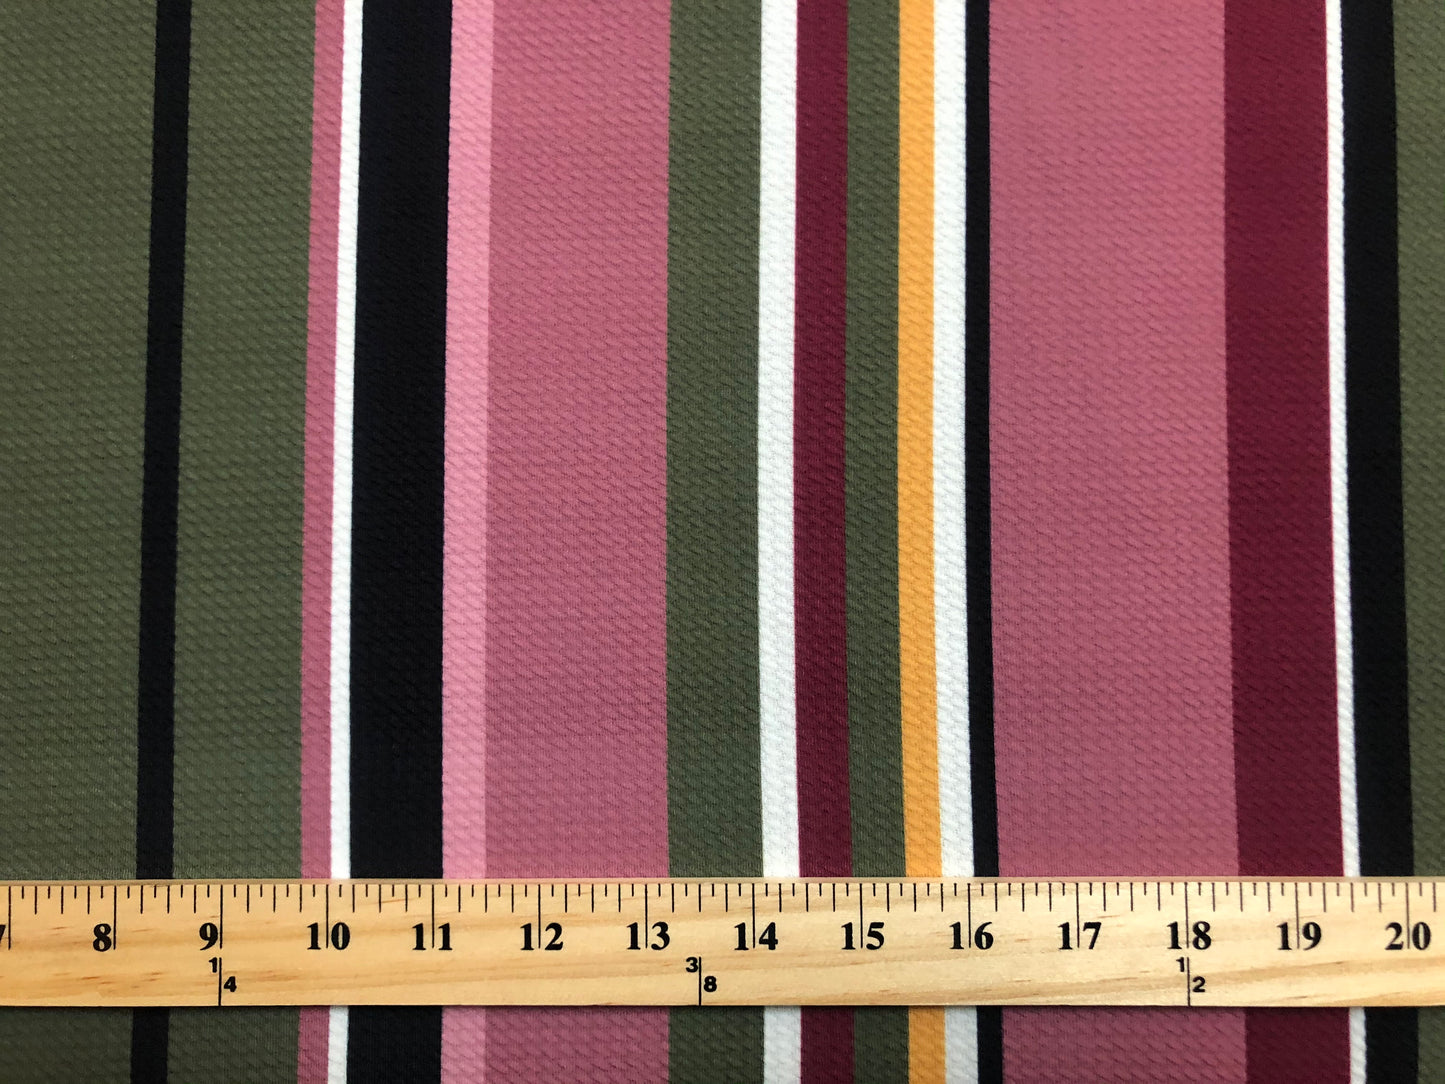 Bullet knit Printed Fabric-Mauve Olive Black Stripes-BPR221-Sold by the Yard-Bulk Available